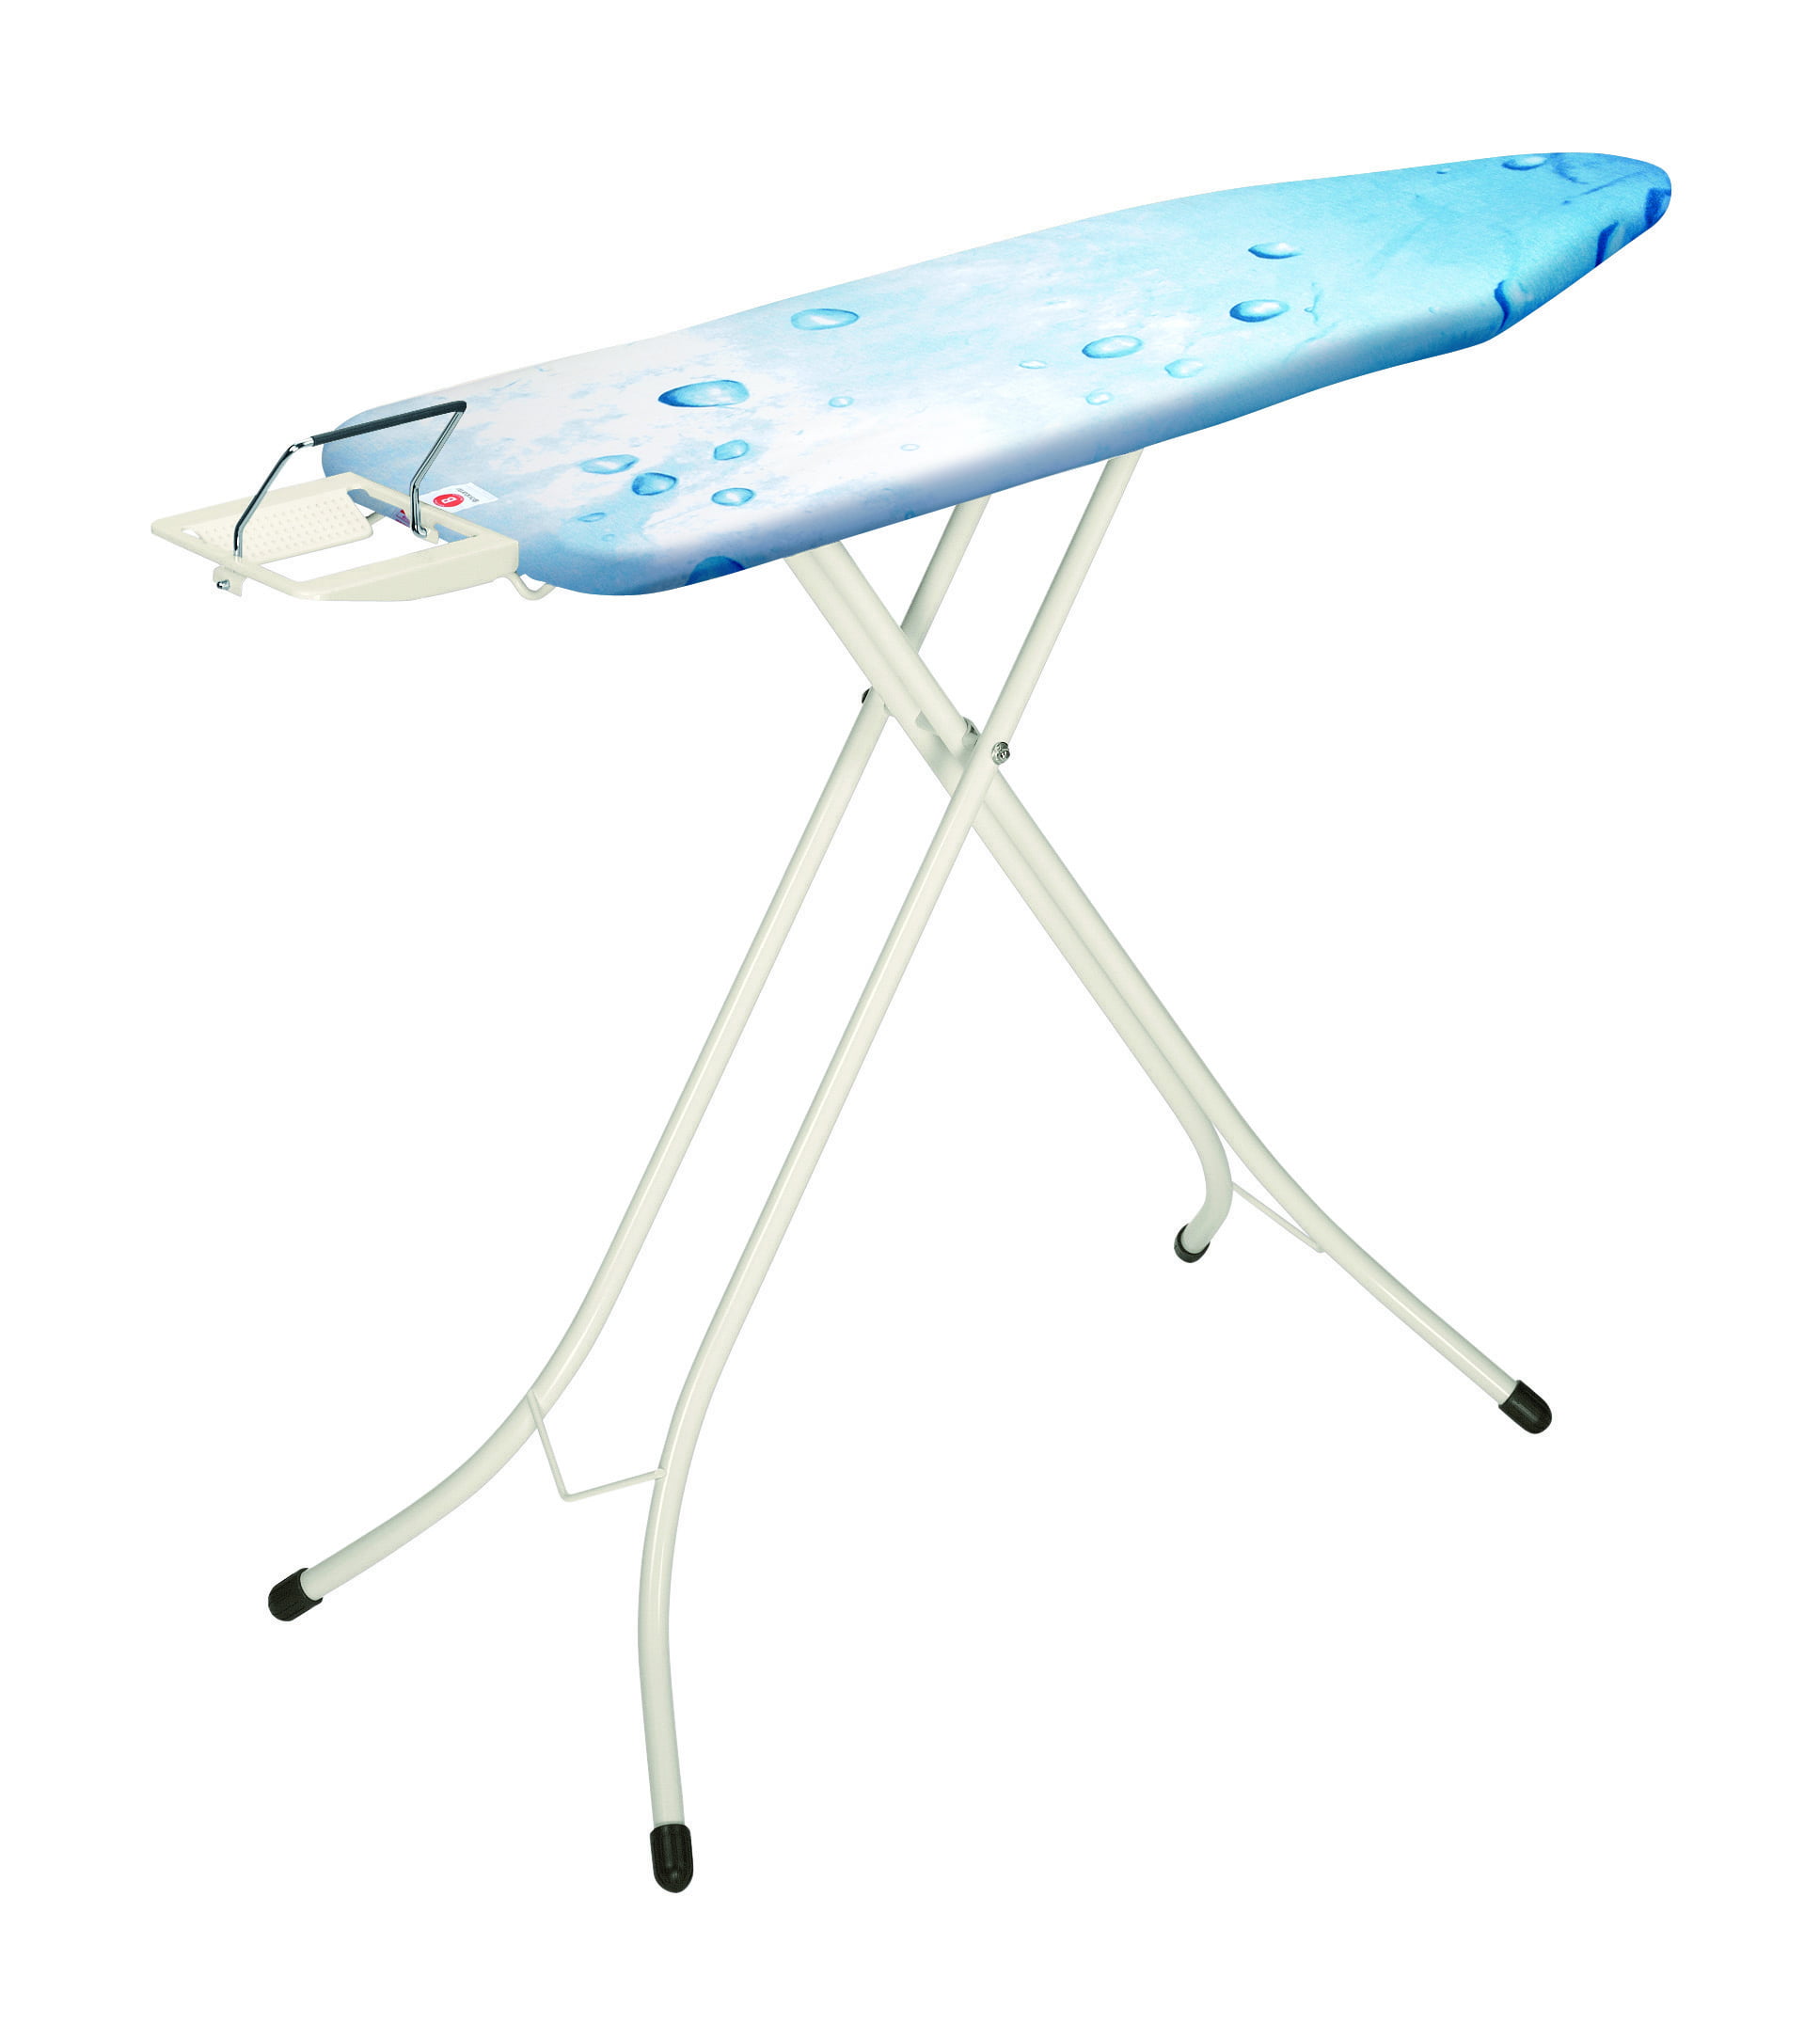 Brabantia Ironing Board B 49 x 15 In with Steam Iron Rest, Ecru Cream Cover  and White Frame 347764 - The Home Depot